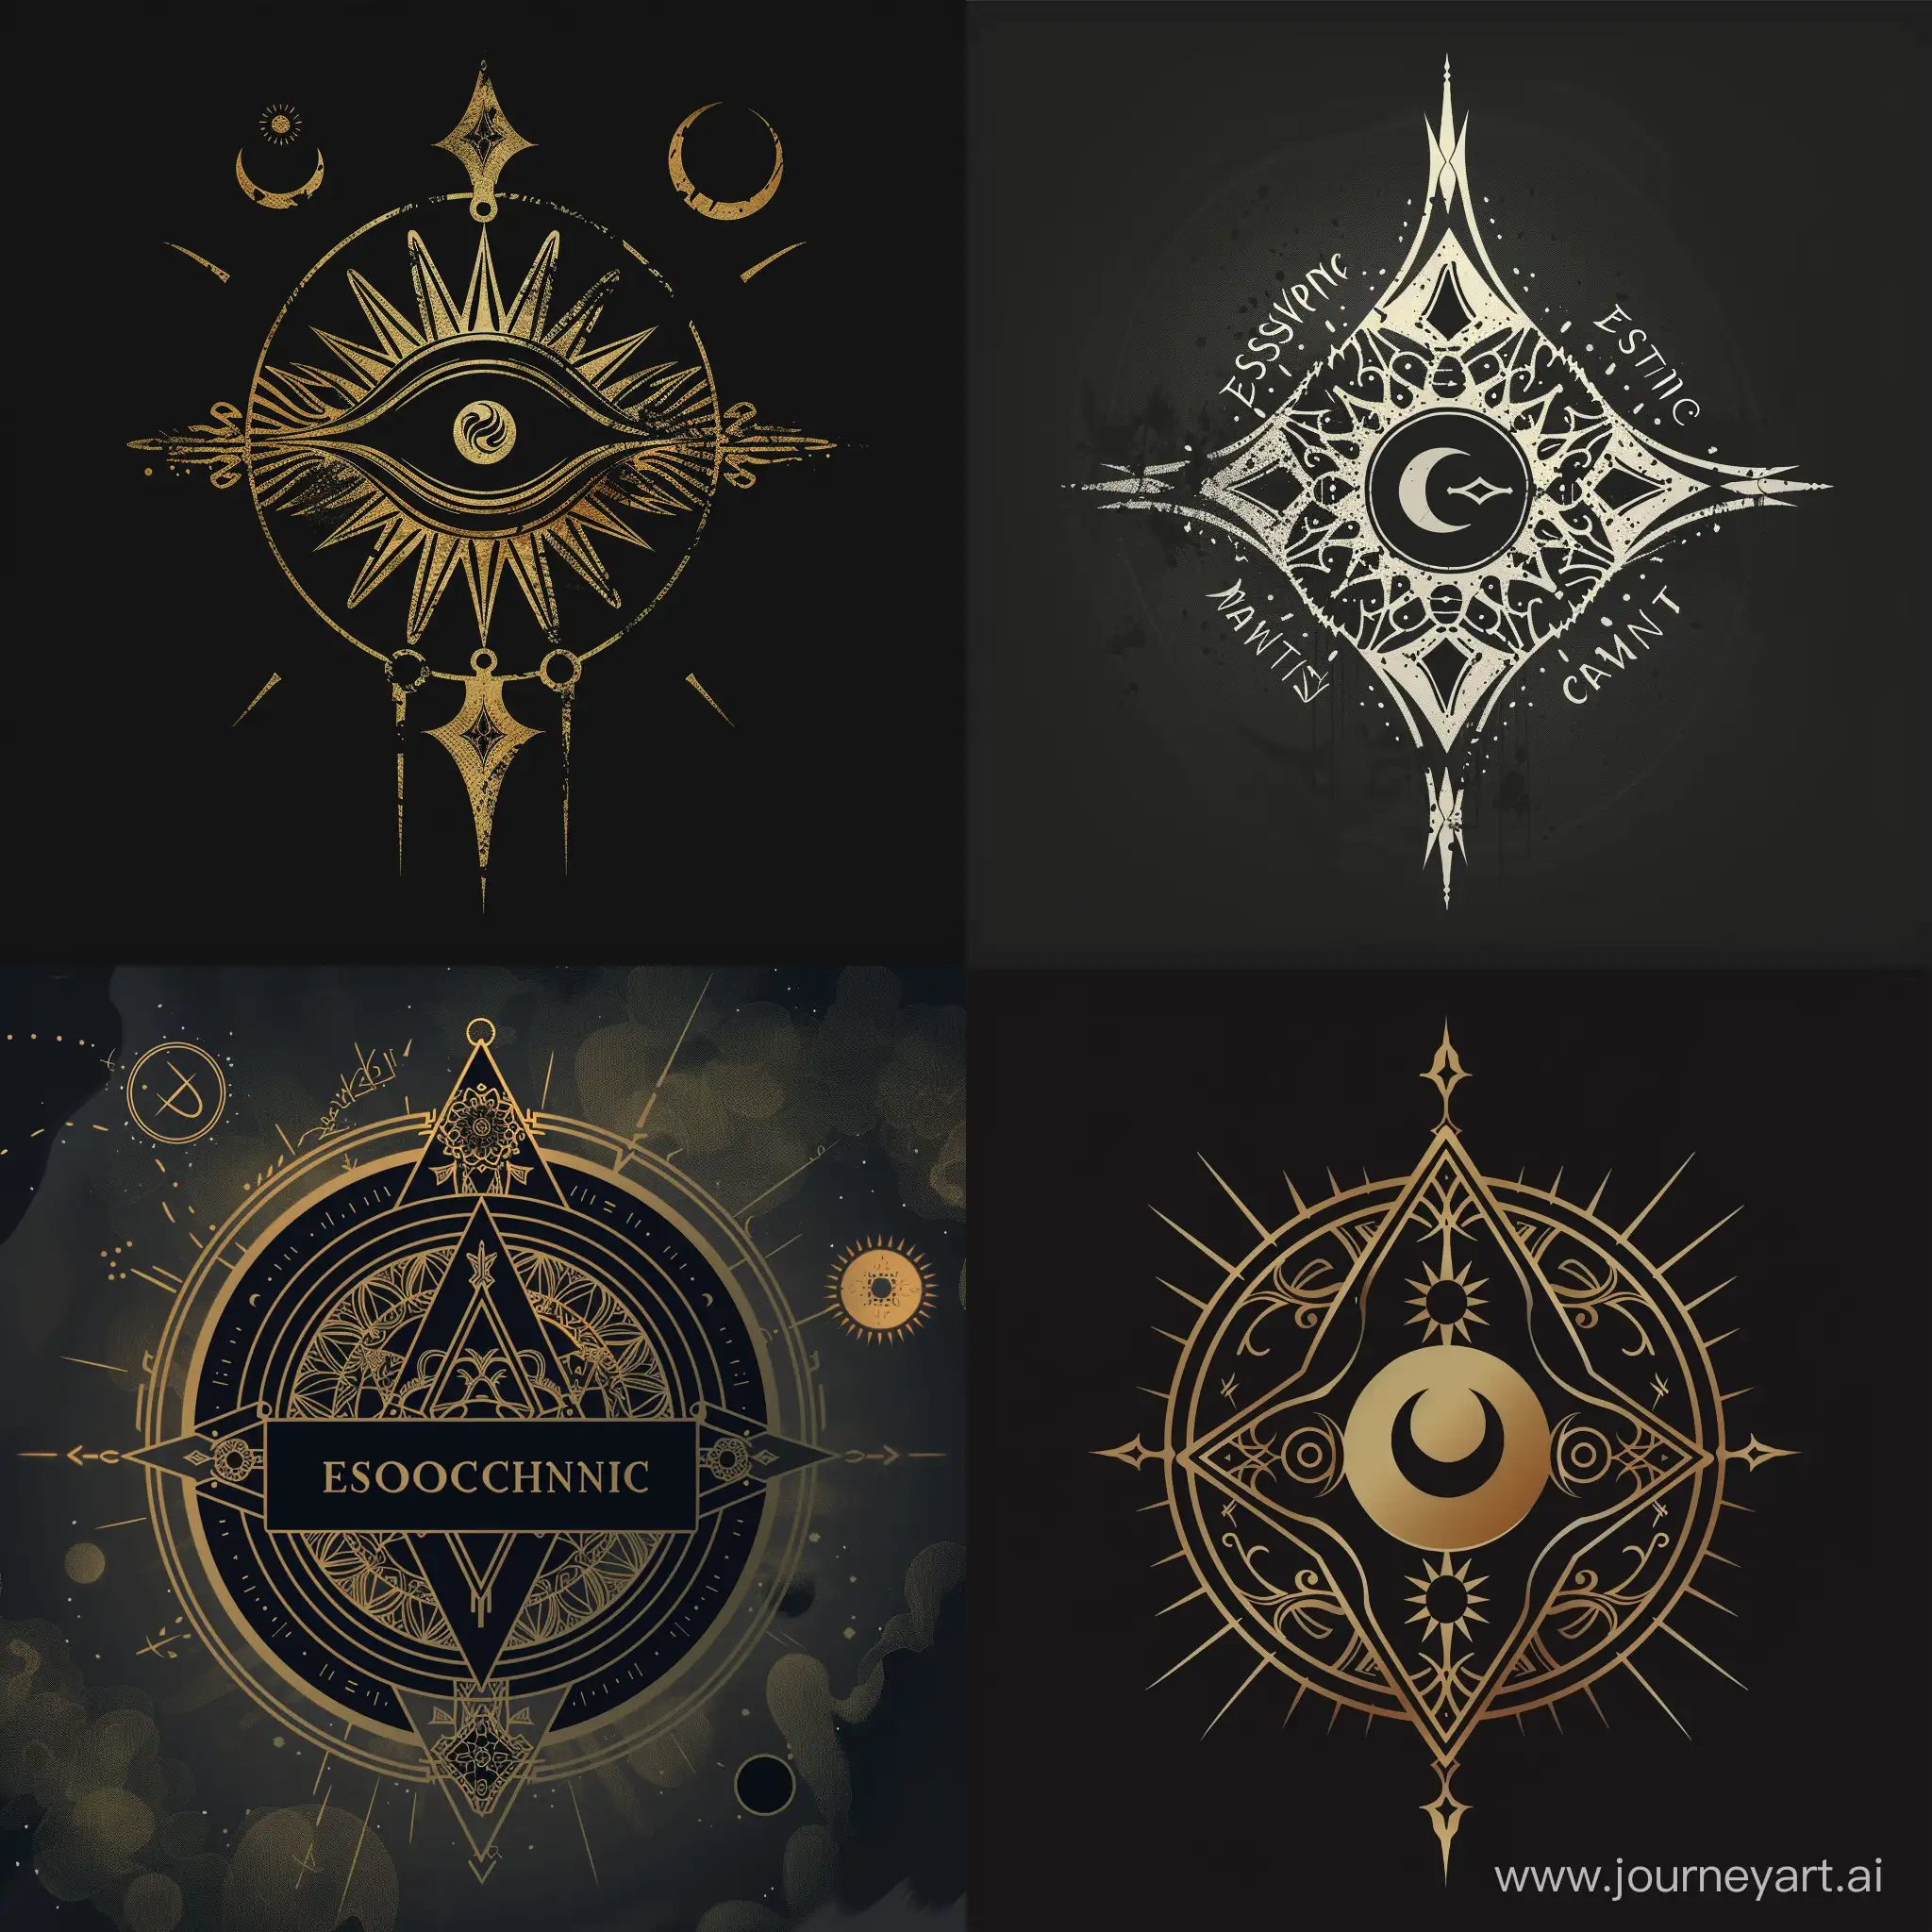 Mystical-Esoteric-Logo-with-Intricate-Symbolism